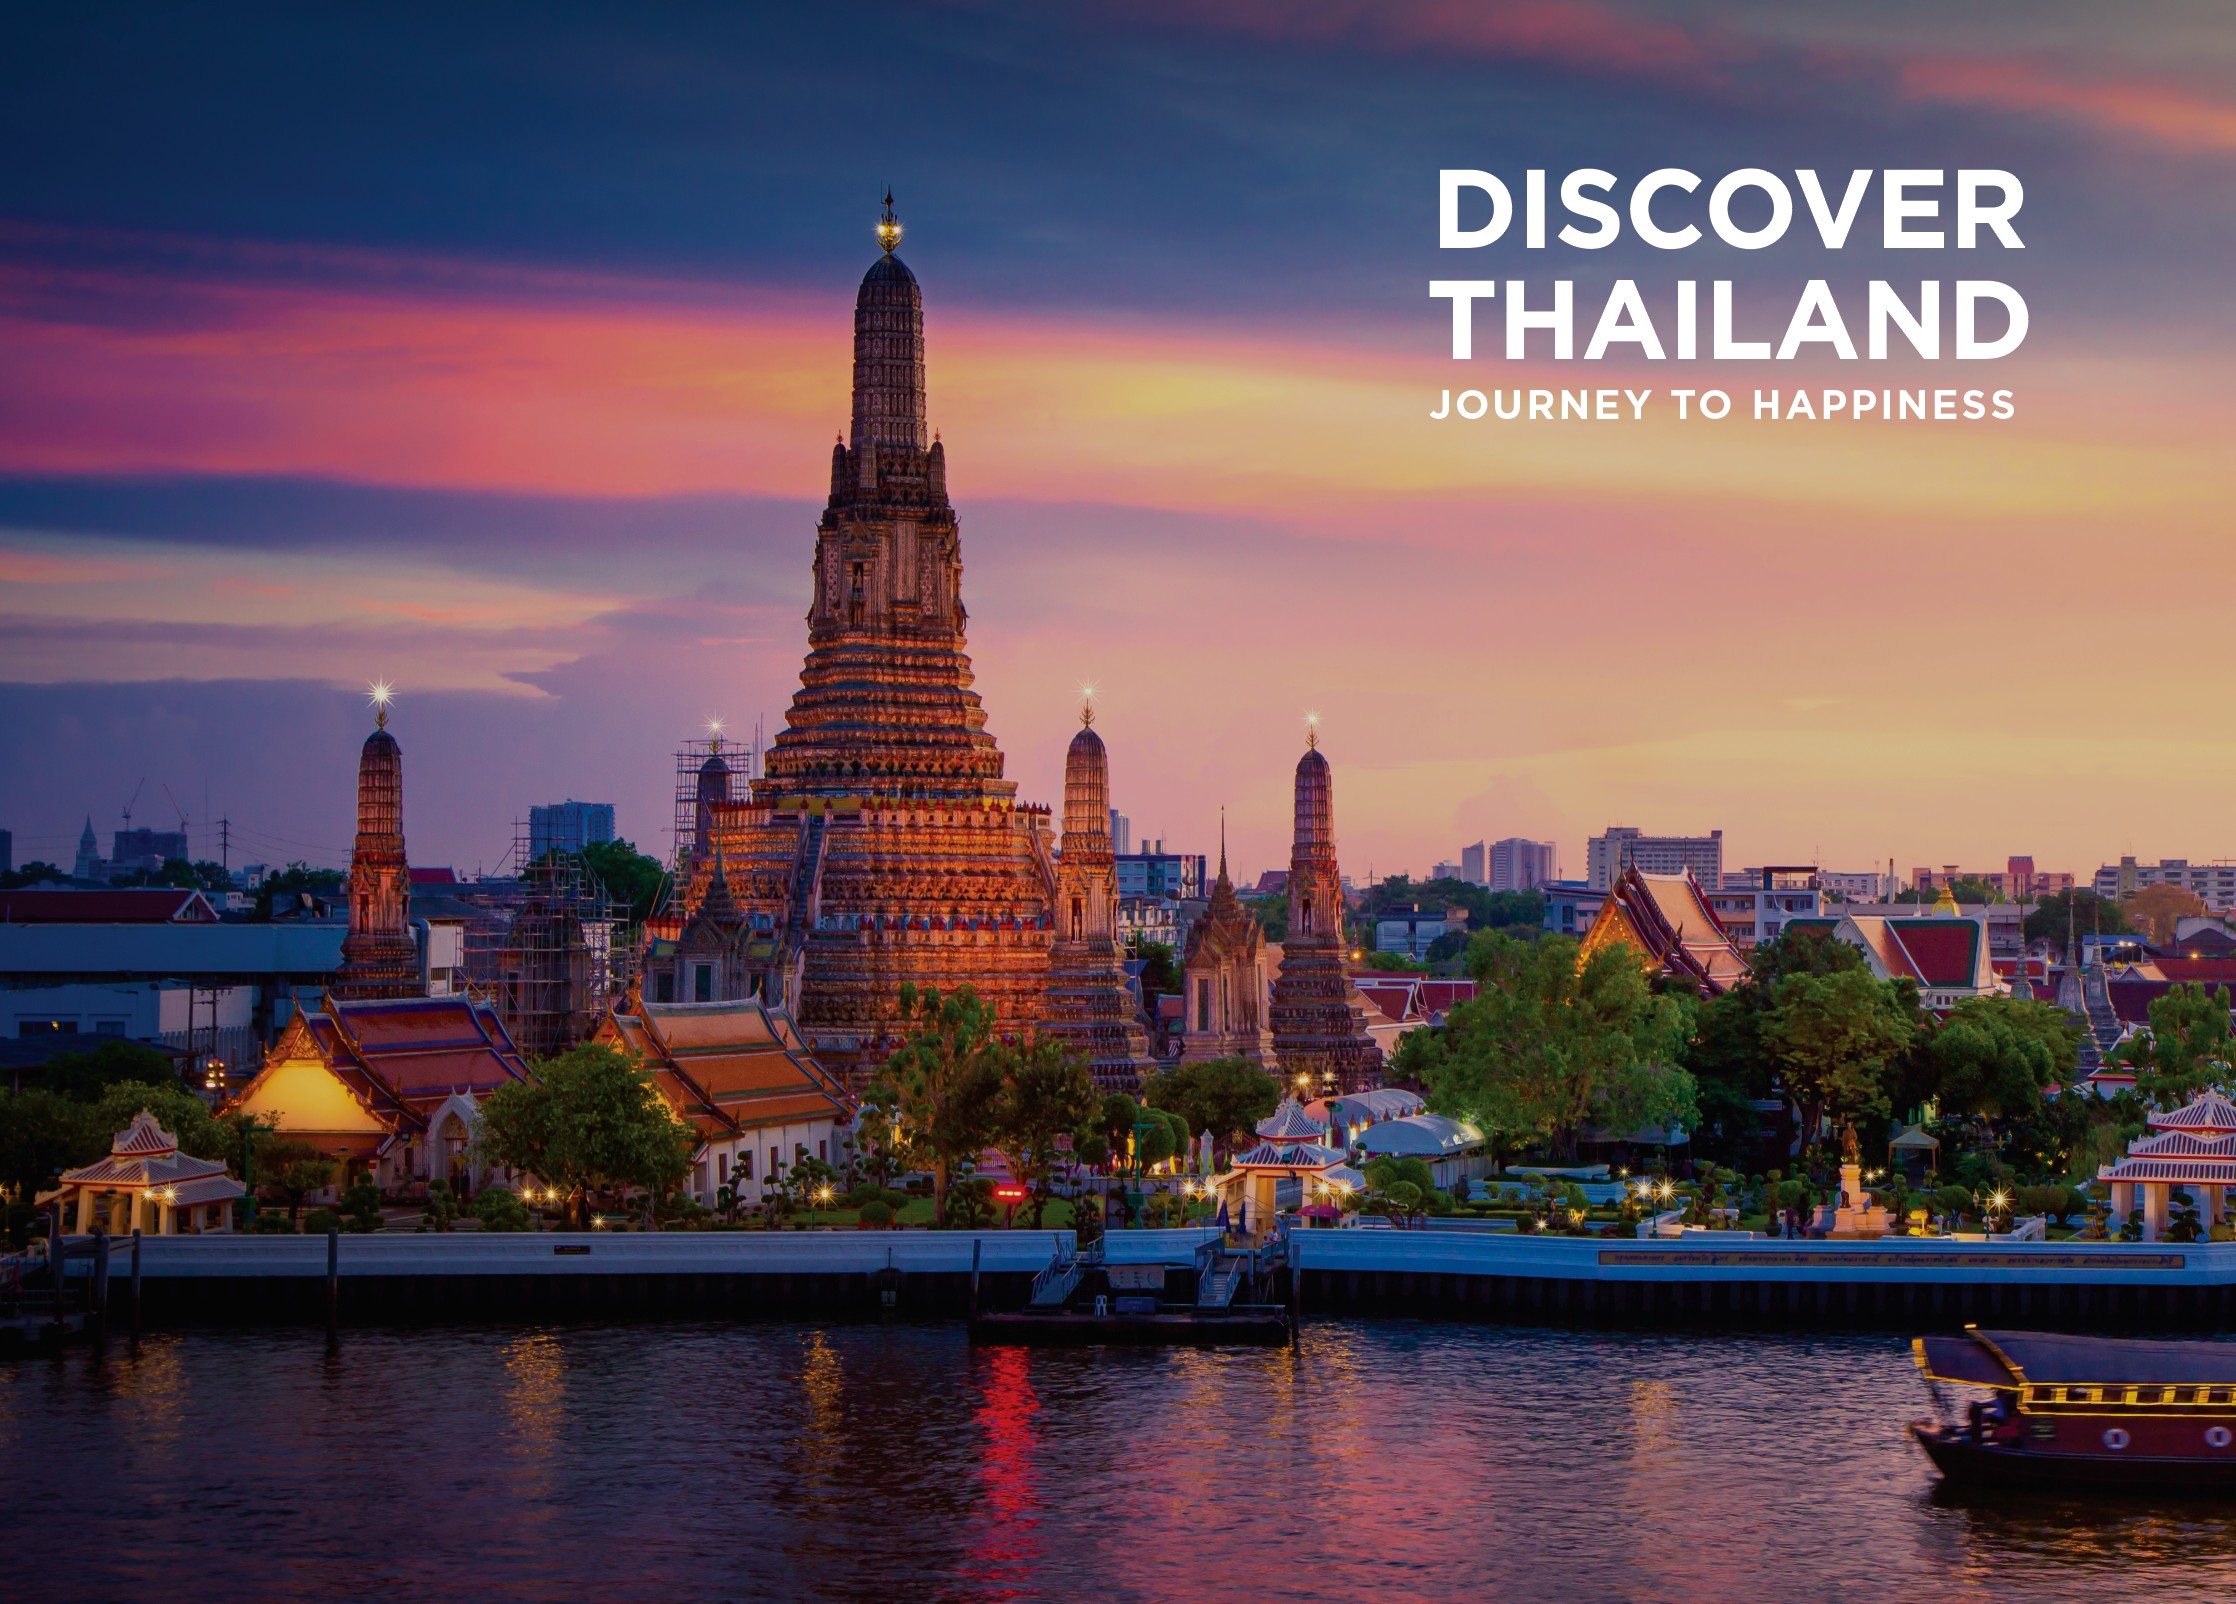 Discover Thailand - Journey to Happiness